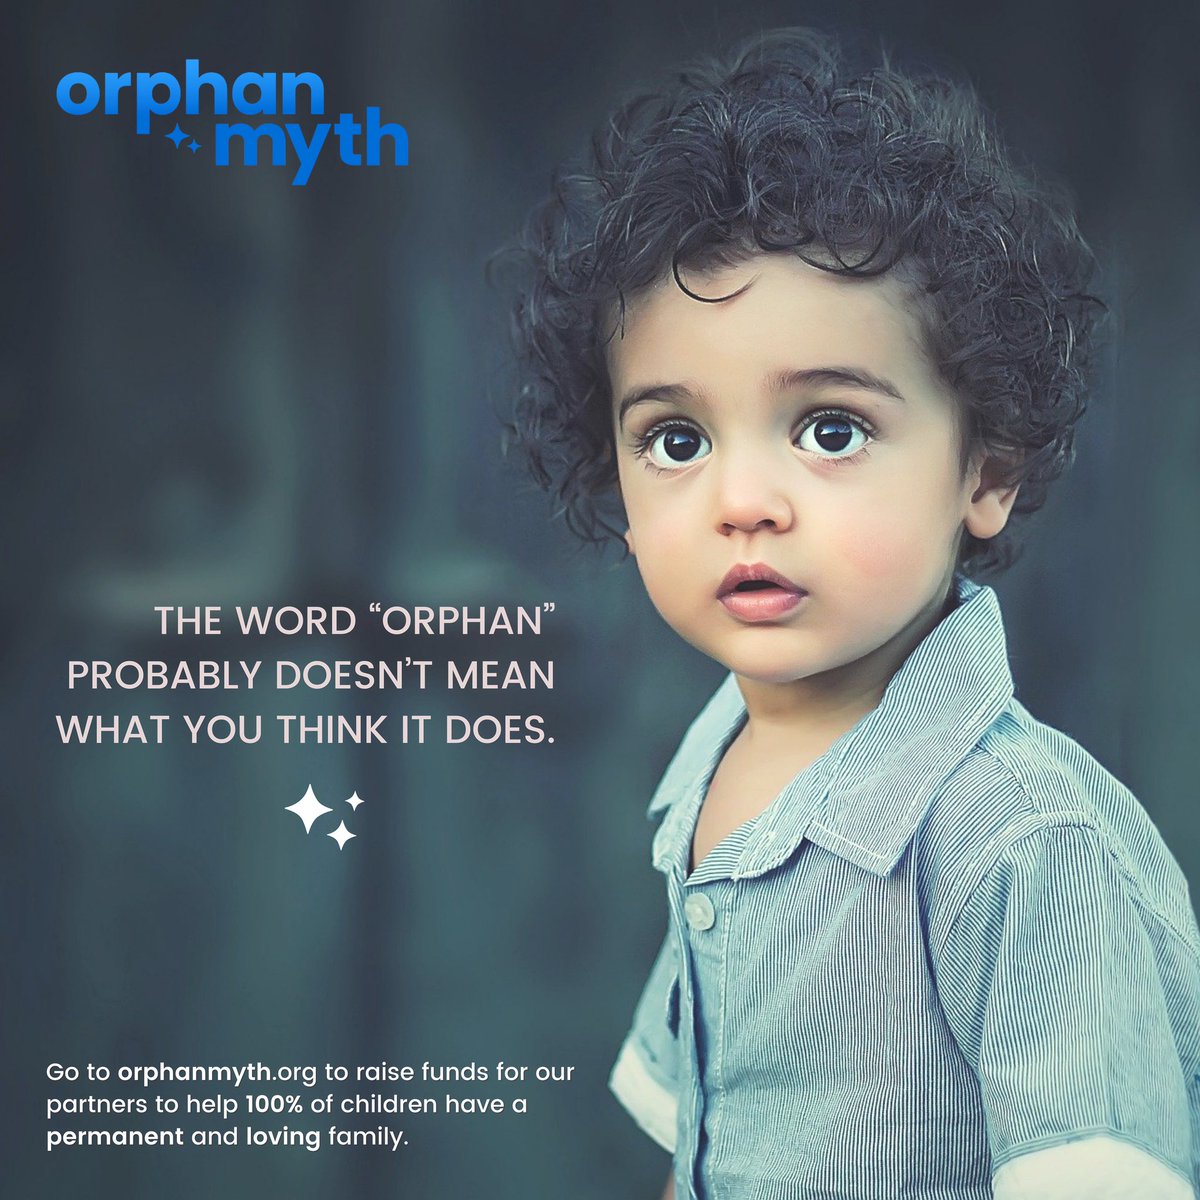 BEB is excited to participate in Orphan Myth‘s #100PercentParticipation movement, launching today through April 8th! Spread the word, form a BEB team of your own, encourage everyone to visit the link in our bio to learn more and support BEB!